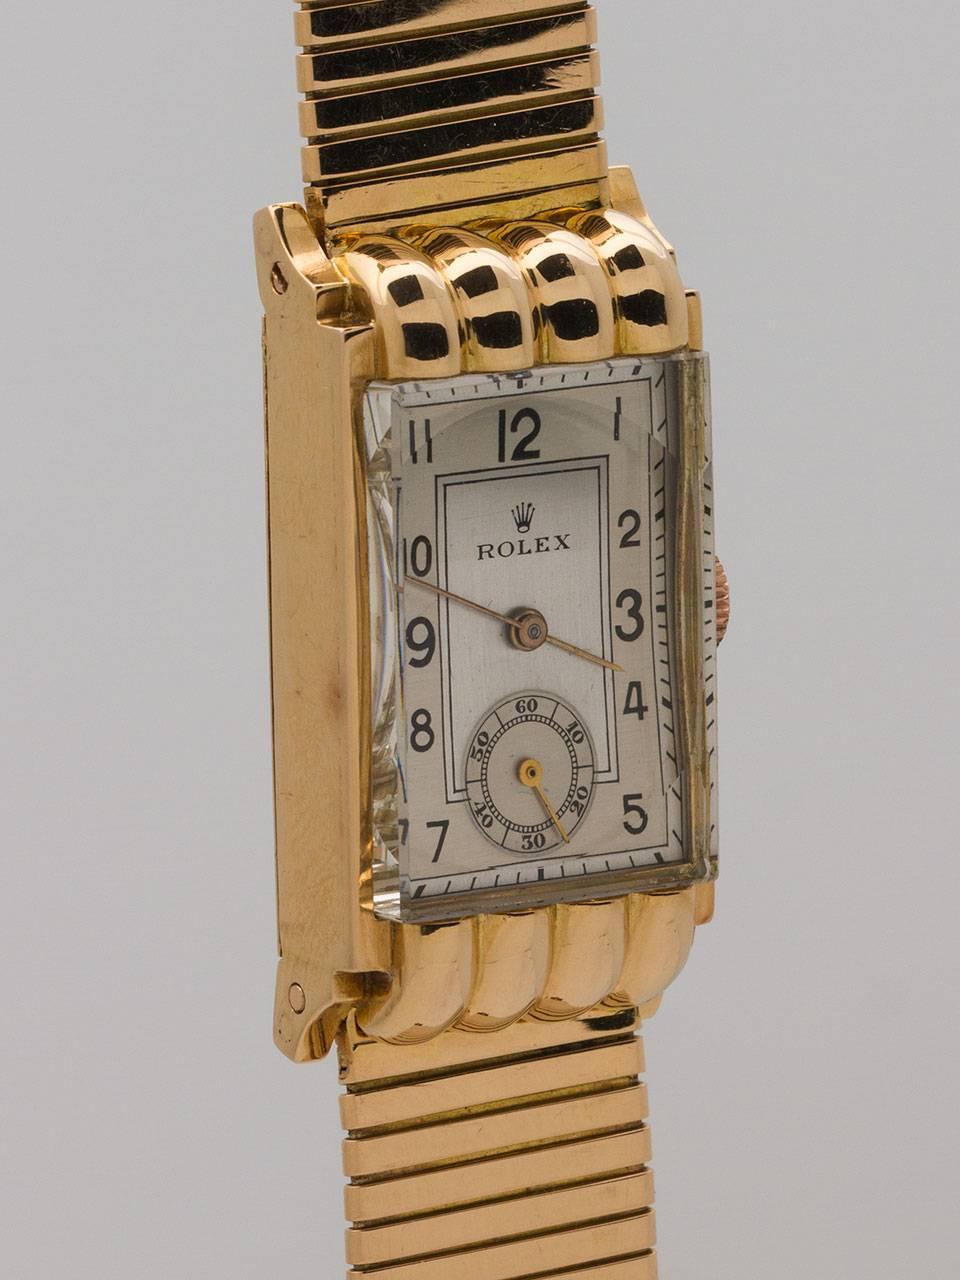 Rolex 18K Yellow Gold dress model featuring highly stylized French made case circa post war 1940’s. Featuring 19 x 38mm case with fluted hooded lug design and squared glass crystal. Beautifully restored silvered satin dial with black Arabic numerals